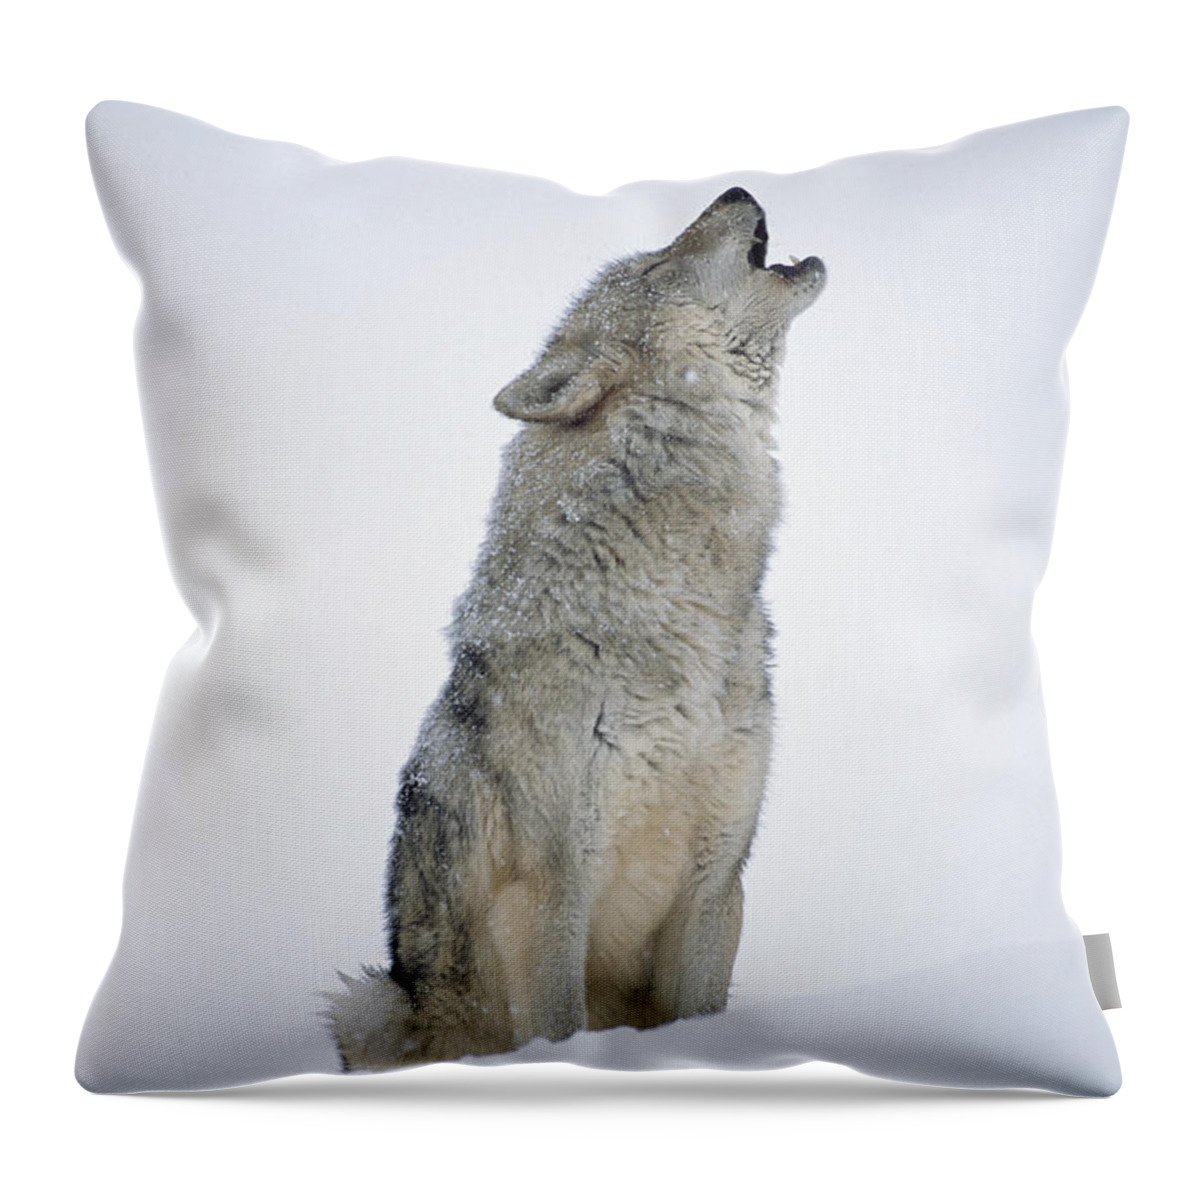 #faatoppicks Throw Pillow featuring the photograph Timber Wolf Portrait Howling In Snow by Tim Fitzharris